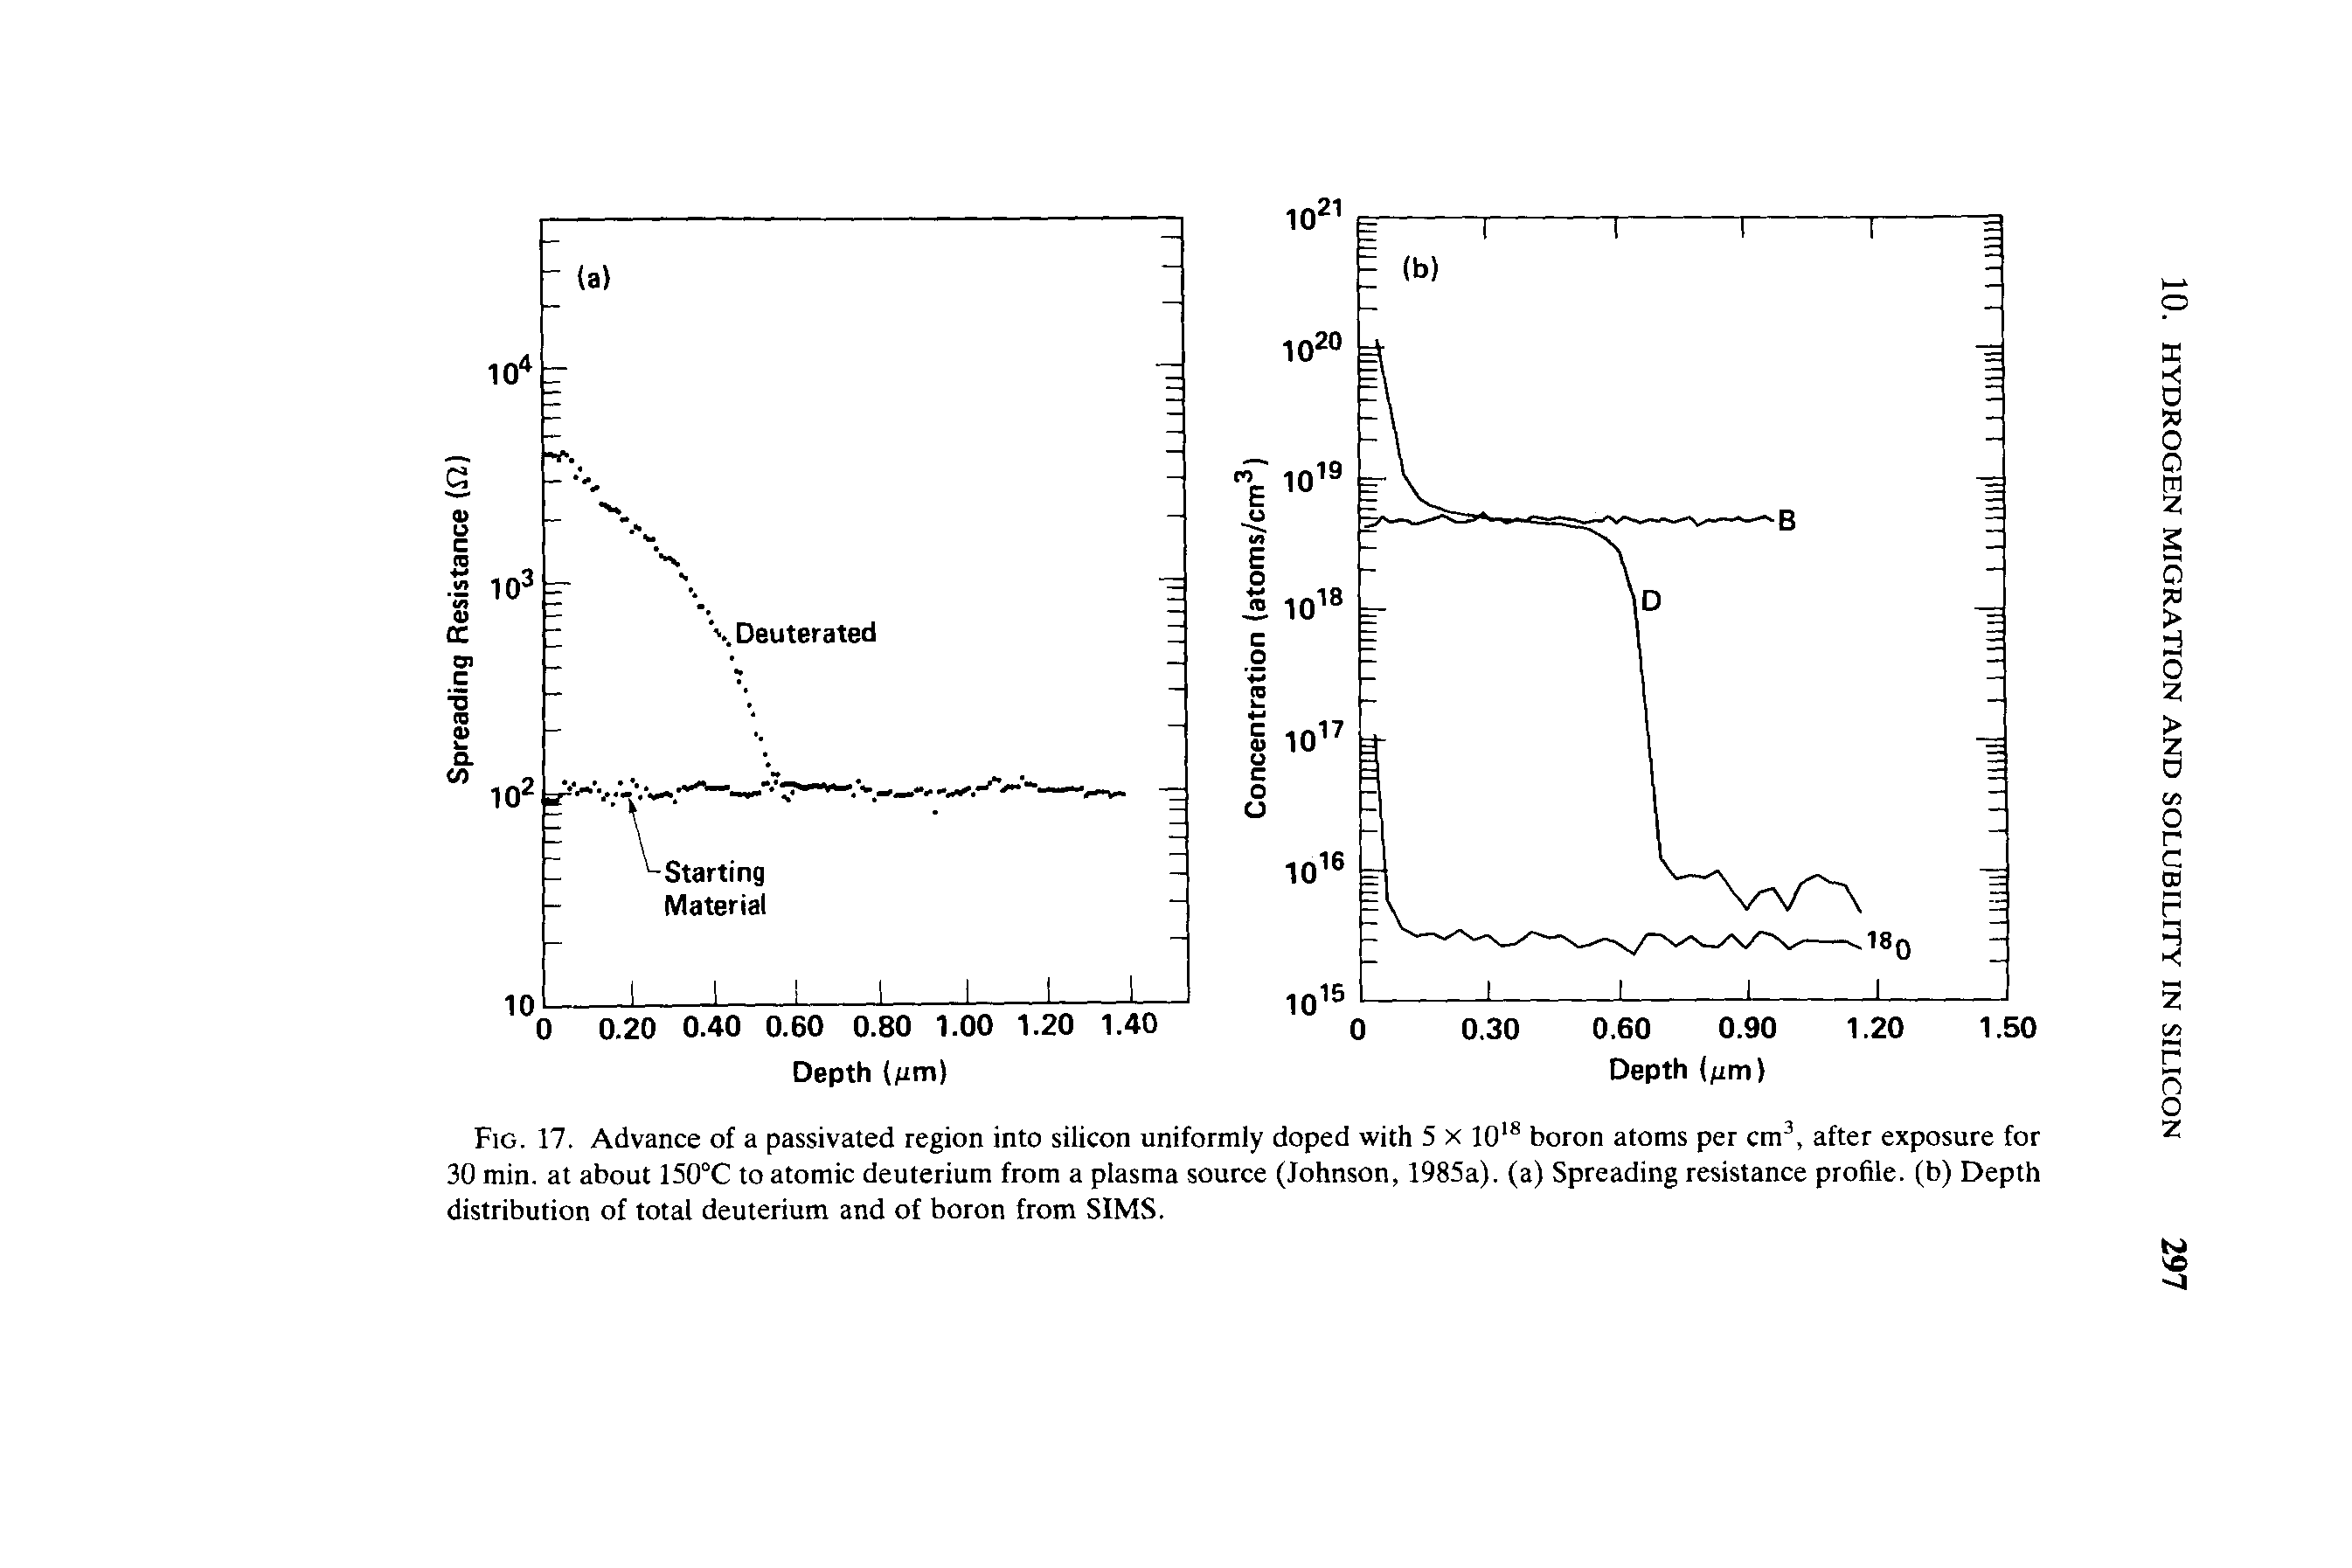 Fig. 17. Advance of a passivated region into silicon uniformly doped with 5 x 1018 boron atoms per cm3, after exposure for 30 min. at about 150°C to atomic deuterium from a plasma source (Johnson, 1985a). (a) Spreading resistance profile, (b) Depth distribution of total deuterium and of boron from SIMS.